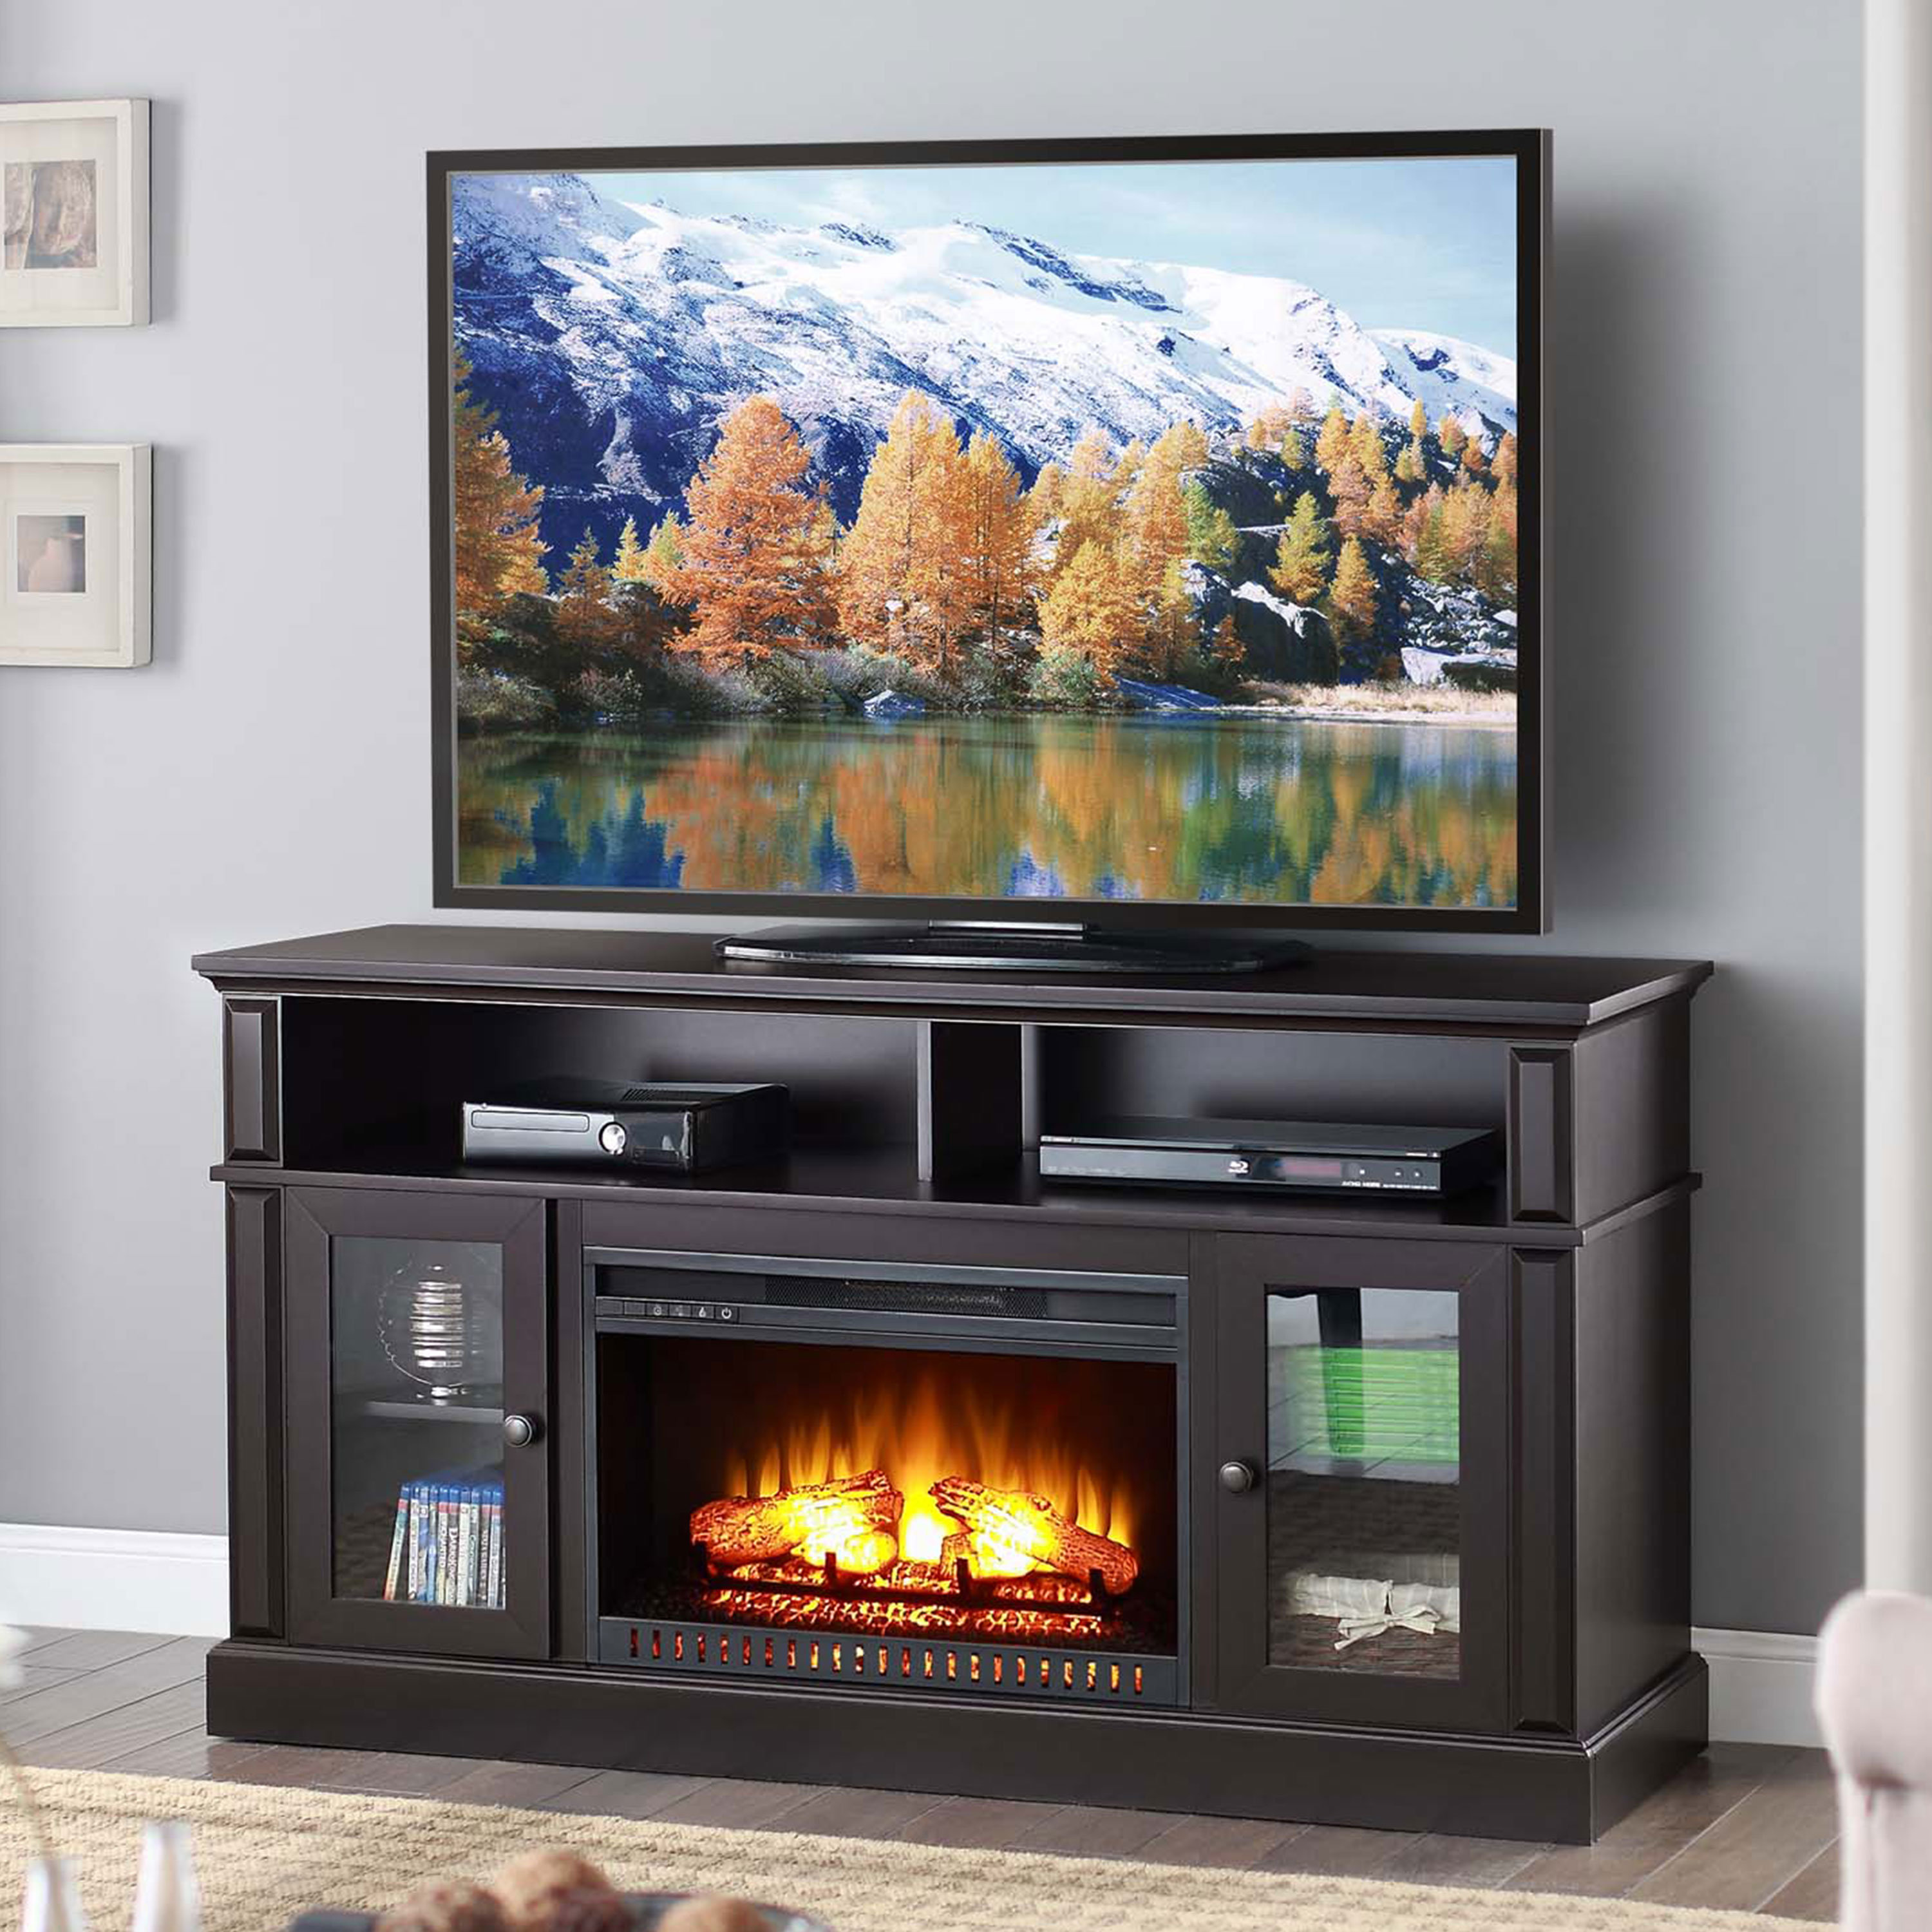 Portable Fireplace Tv Stand Fresh Whalen Barston Media Fireplace for Tv S Up to 70 Multiple Finishes